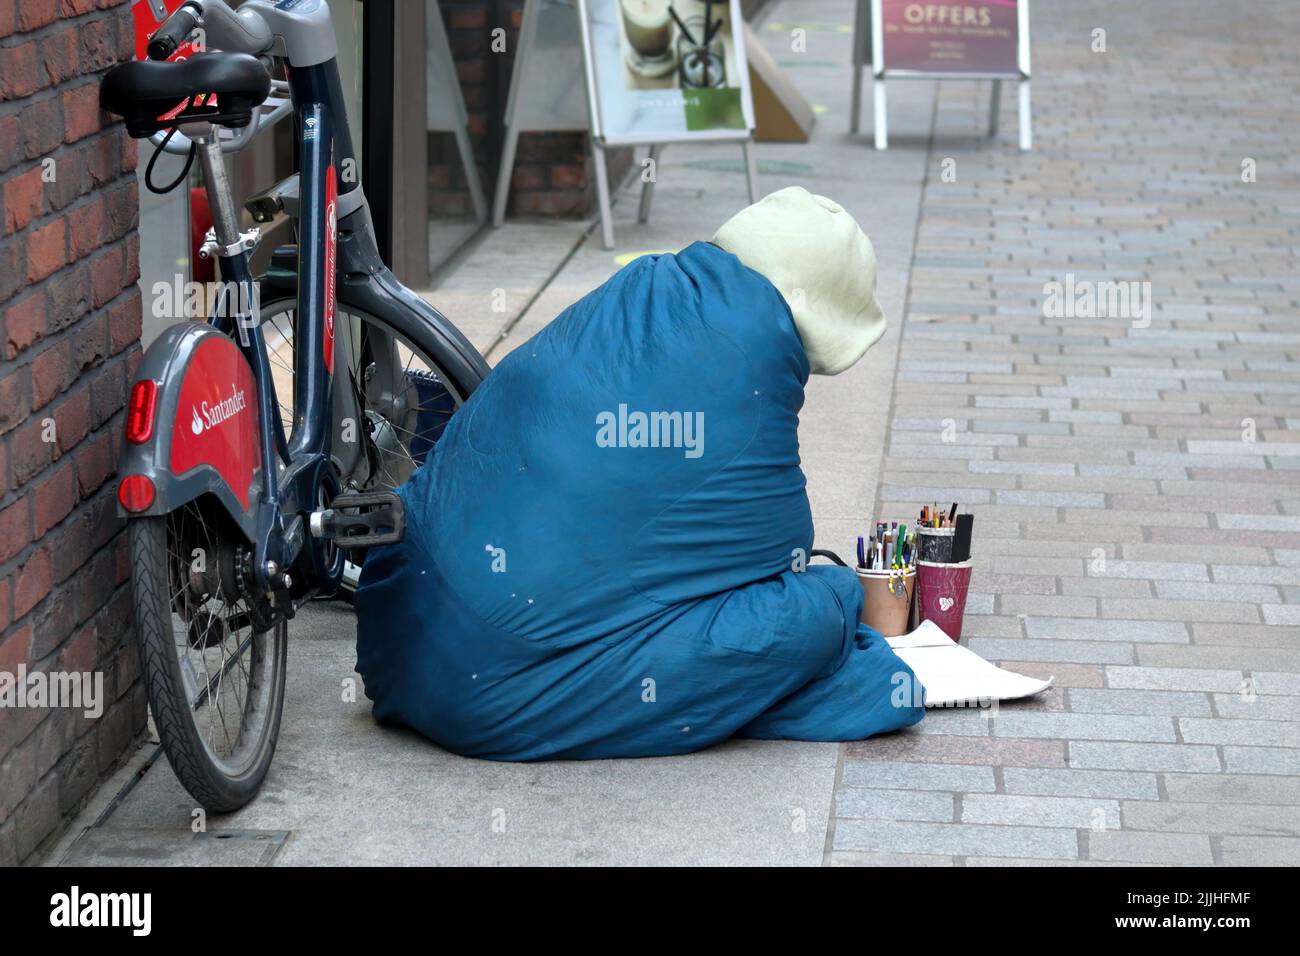 London, UK - Nov 21, 2021: homeless poor man painting while sitting on a pavement. Stock Photo